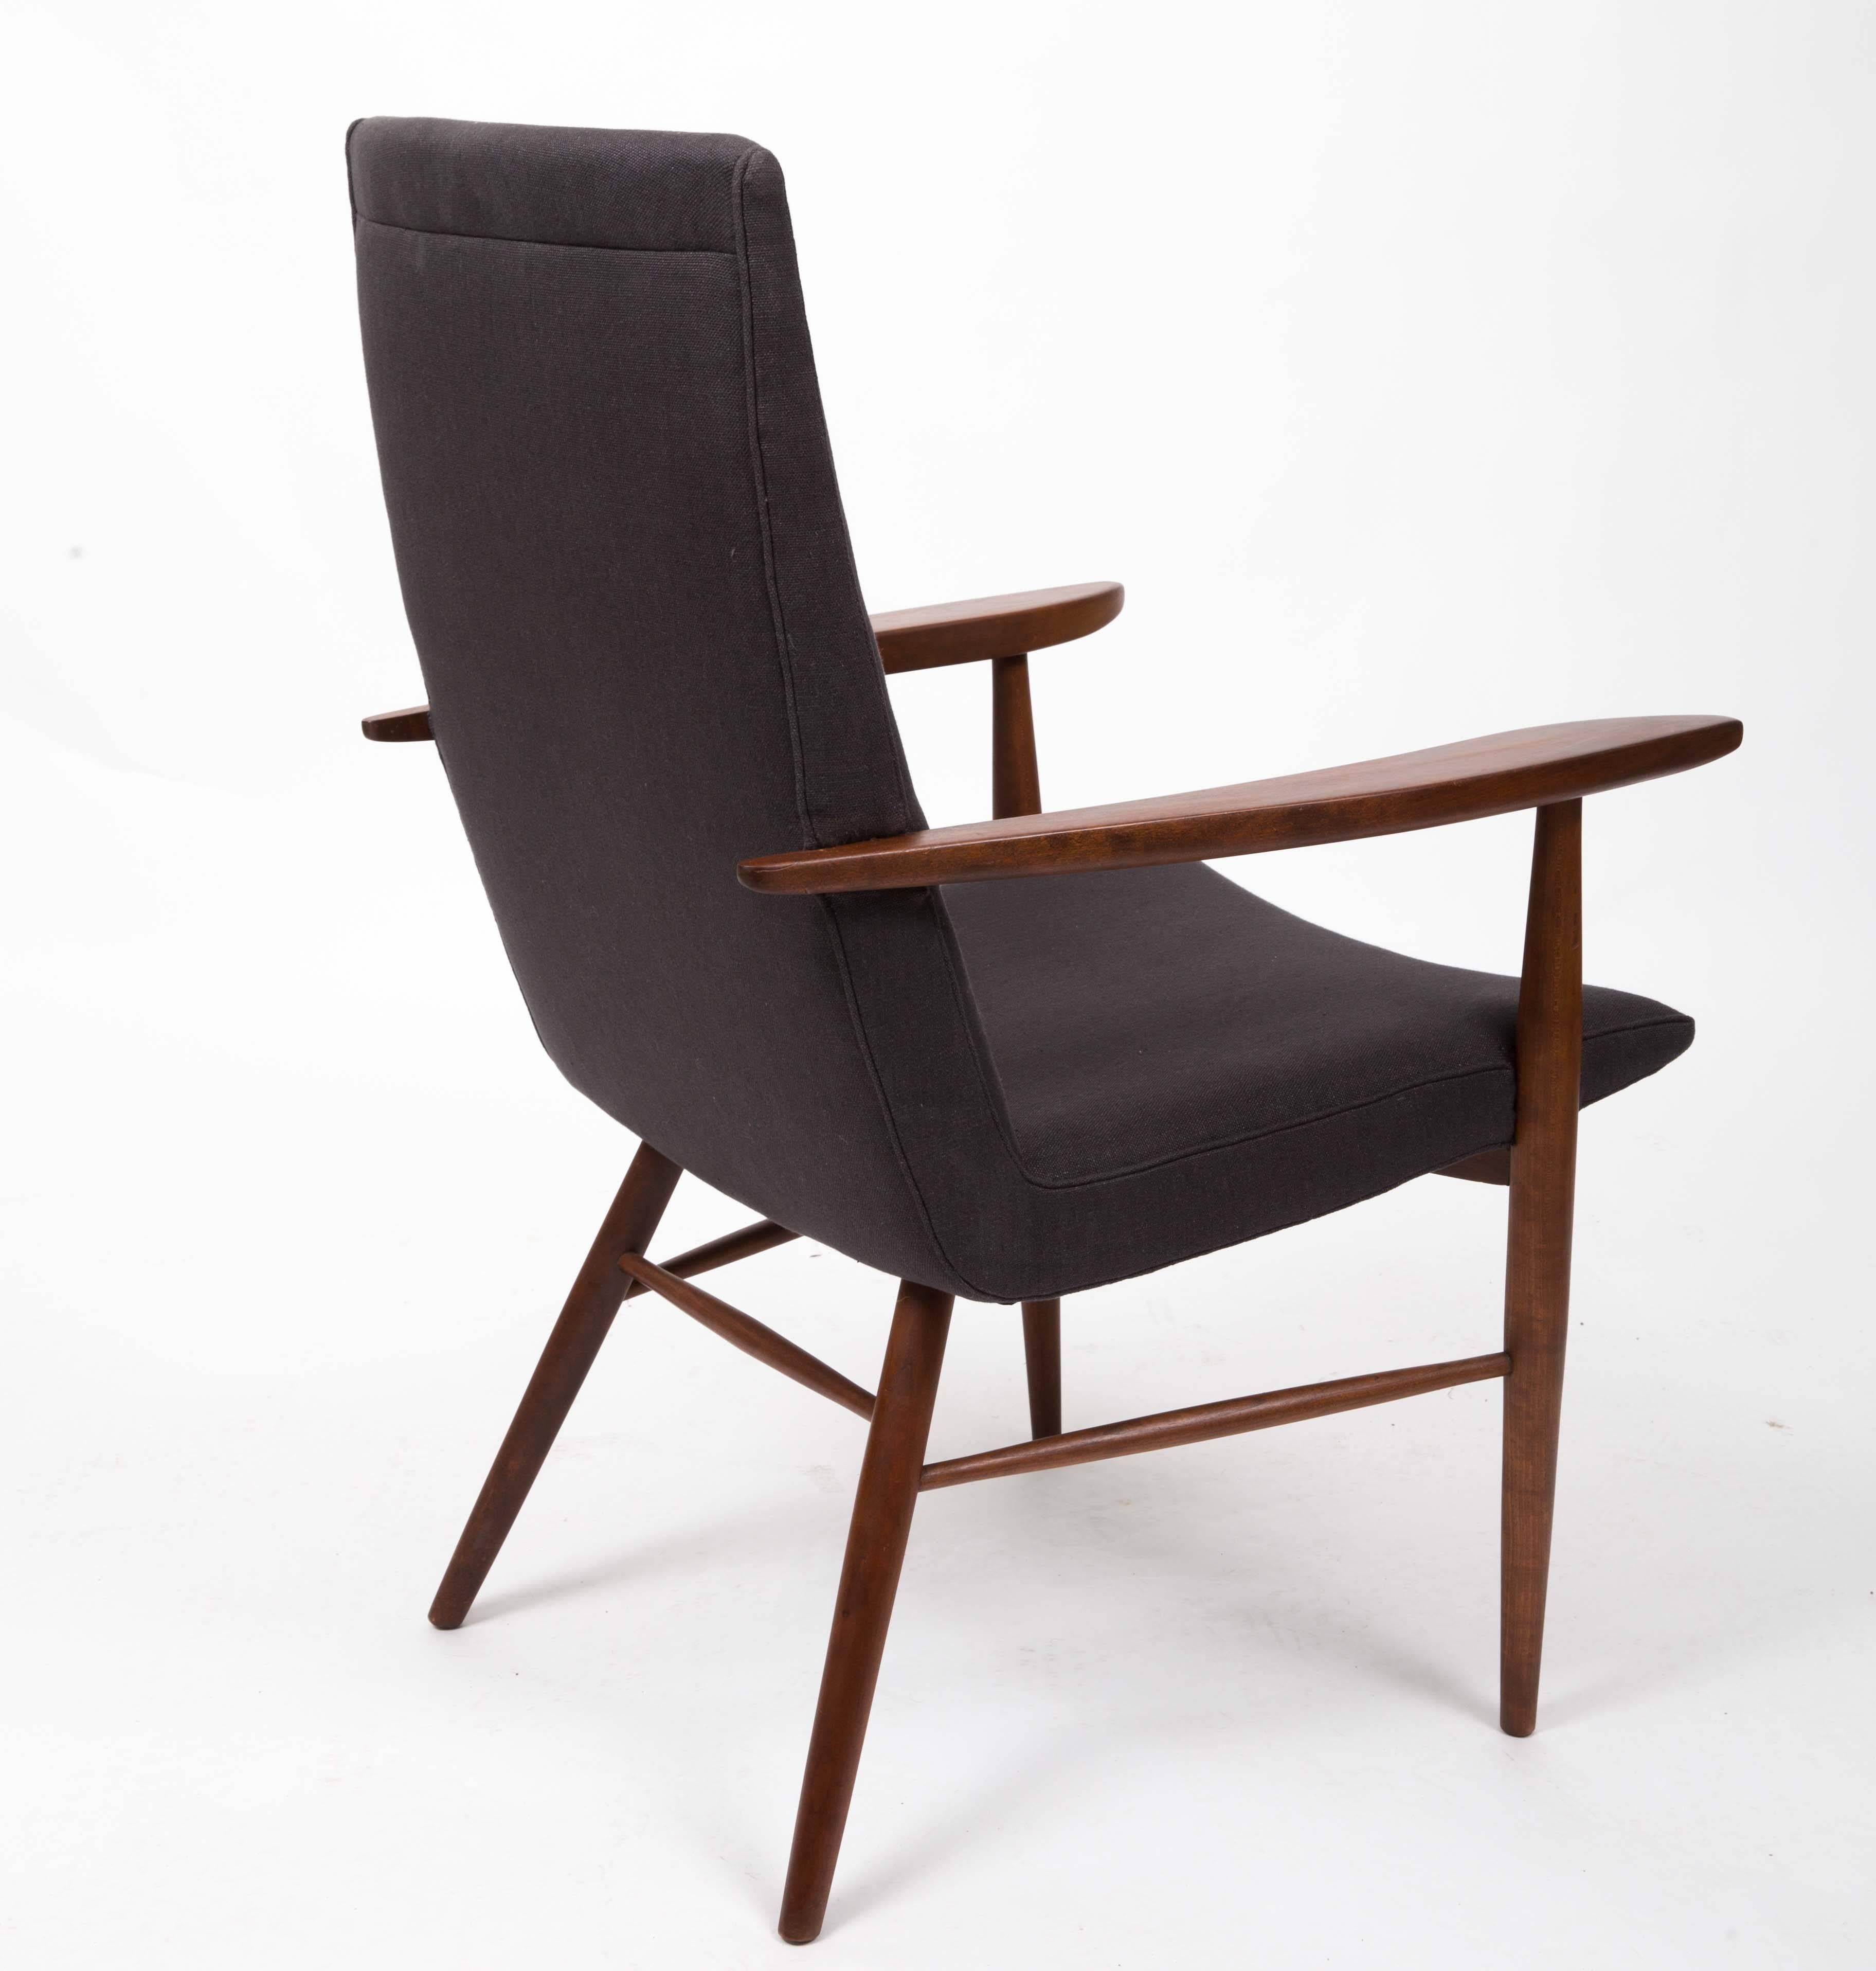 Mid-20th Century Upholstered Dining Chair by George Nakashima for Widdicomb